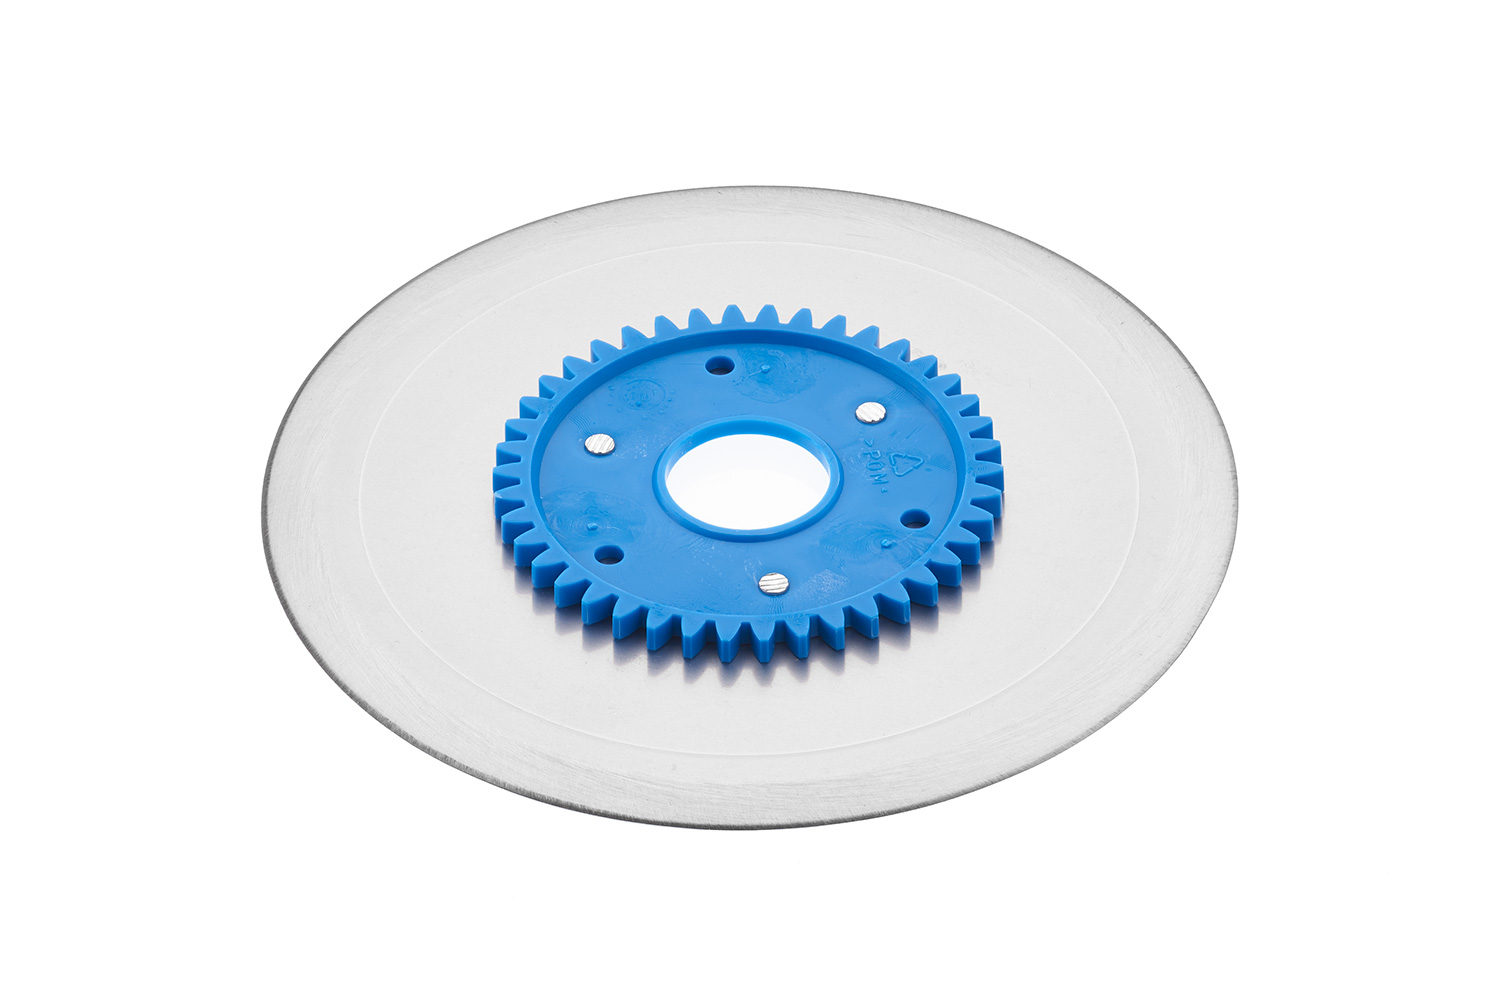 Standard ham- and sausage circular blade with a blue gear